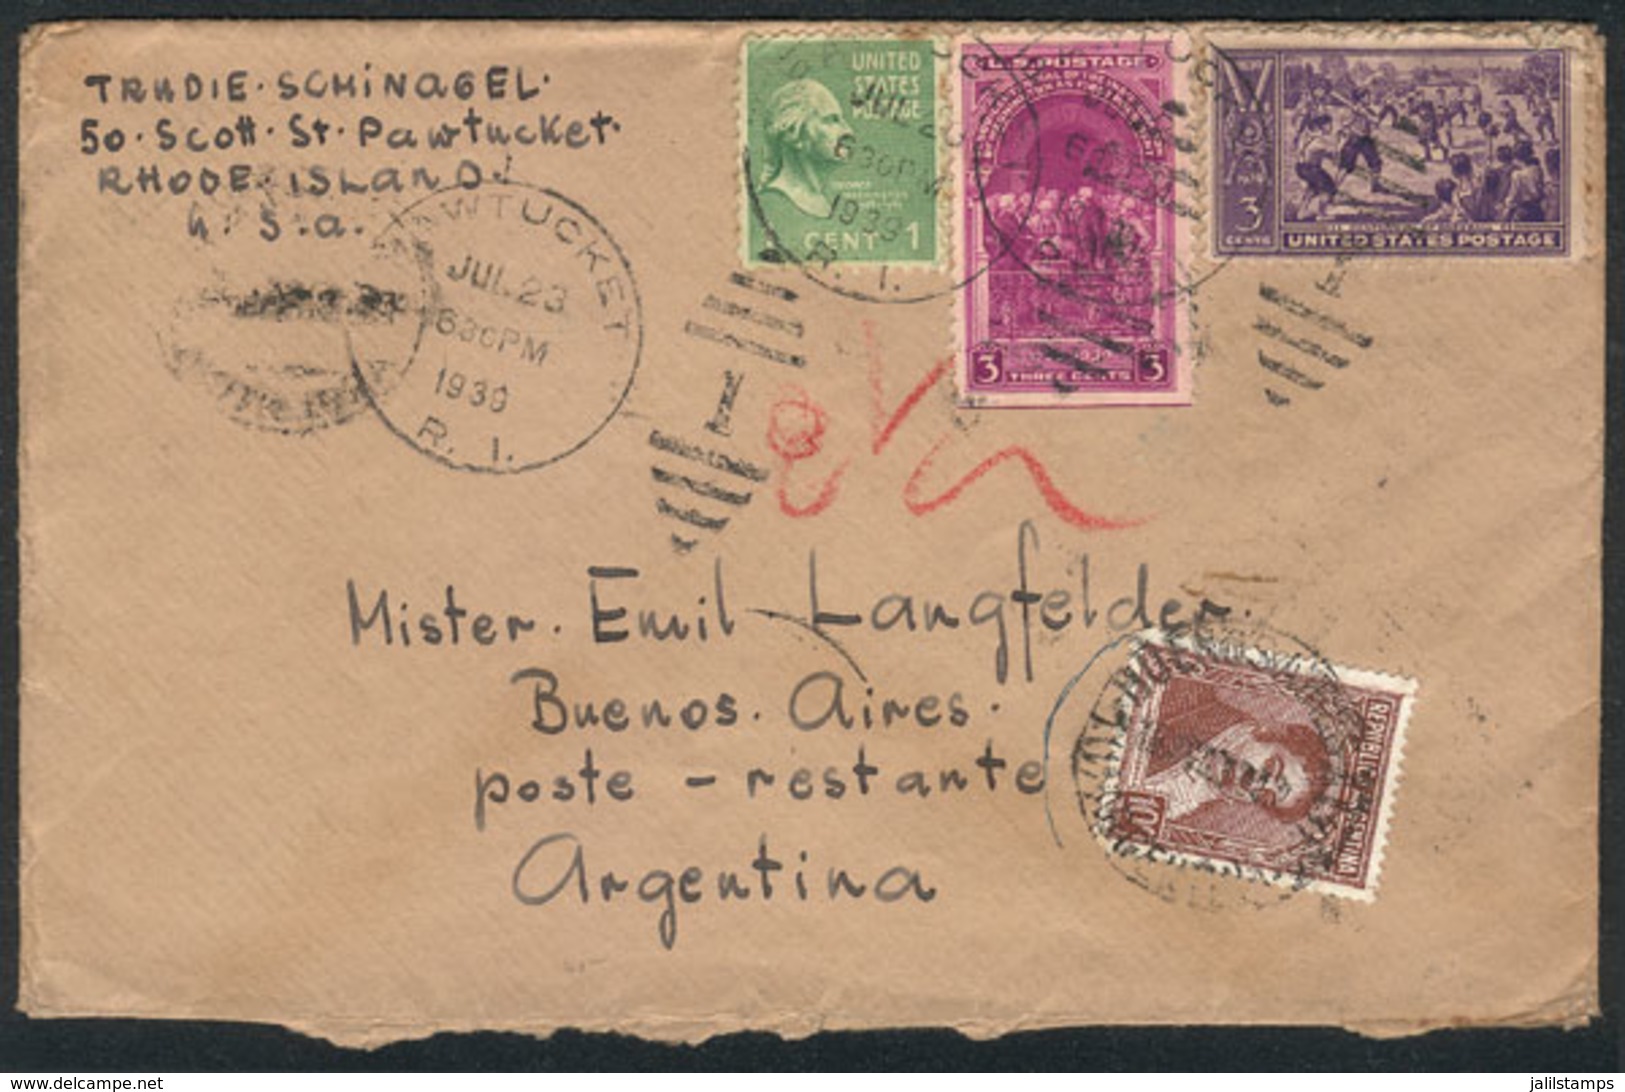 UNITED STATES: Cover Sent From Rhode Island To Poste Restante (Buenos Aires) On 20/JUL/1939, With Argentina Stamp Of 10c - Marcofilie